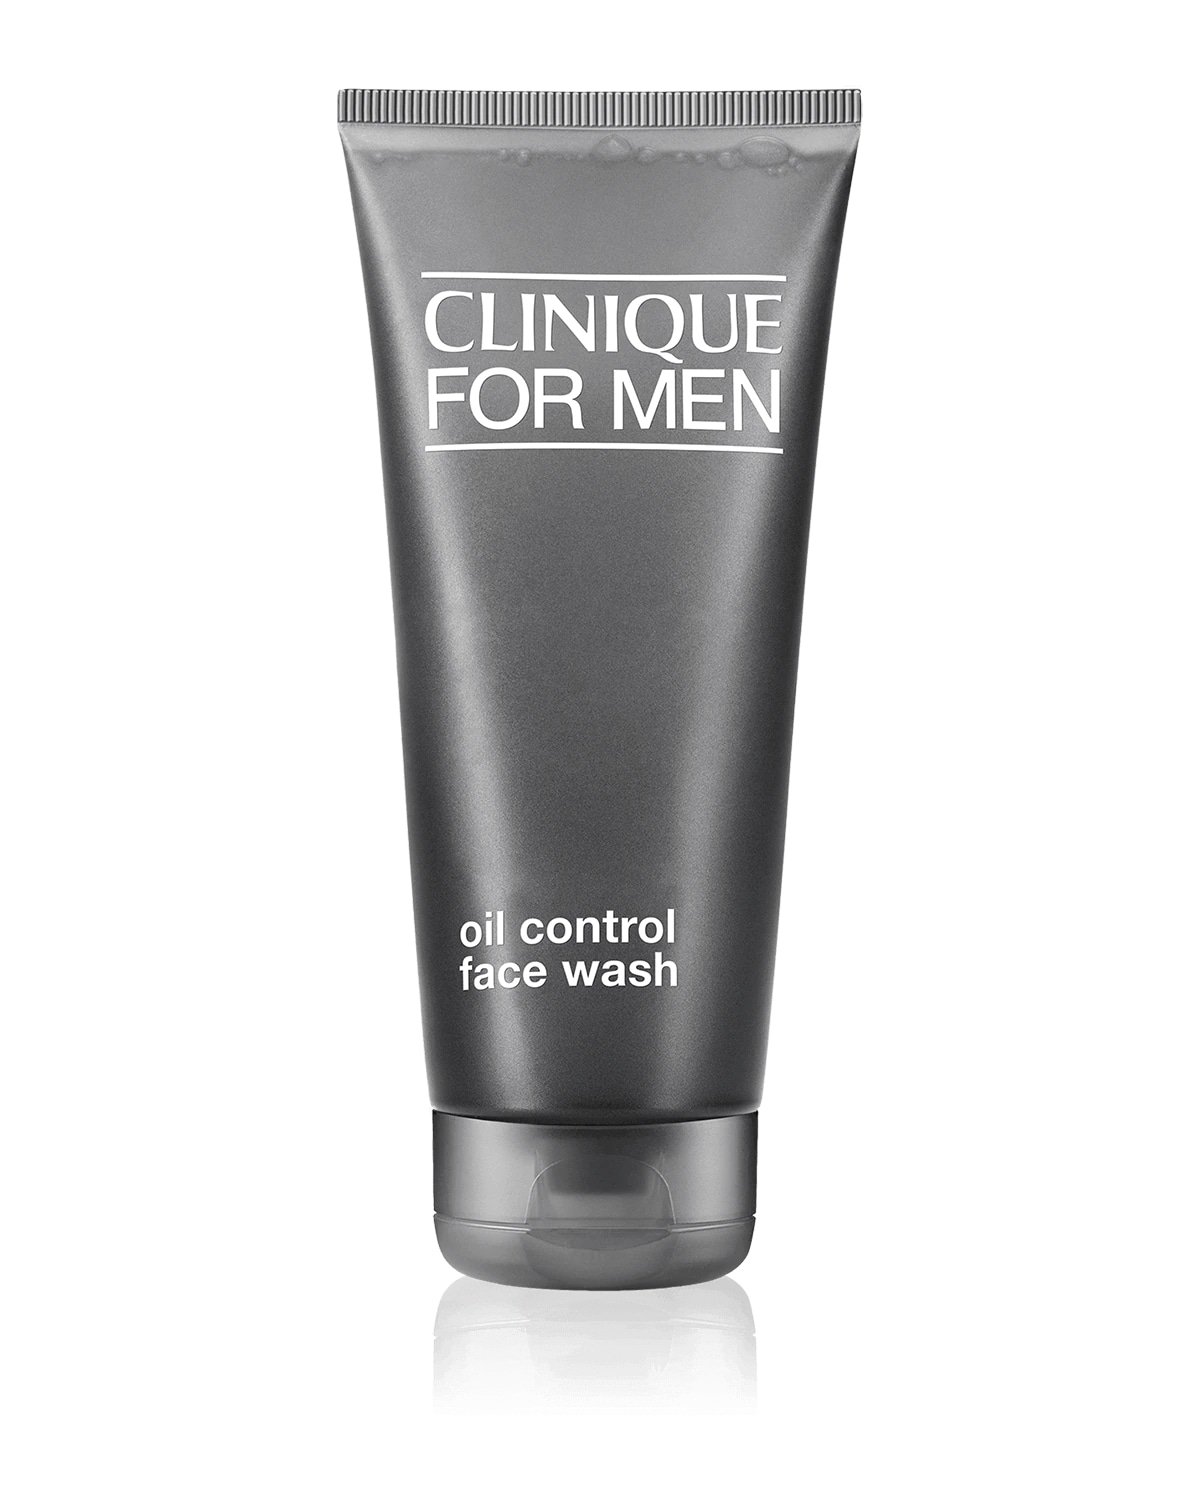 Жидкое мыло Clinique for Men Face Wash Oily